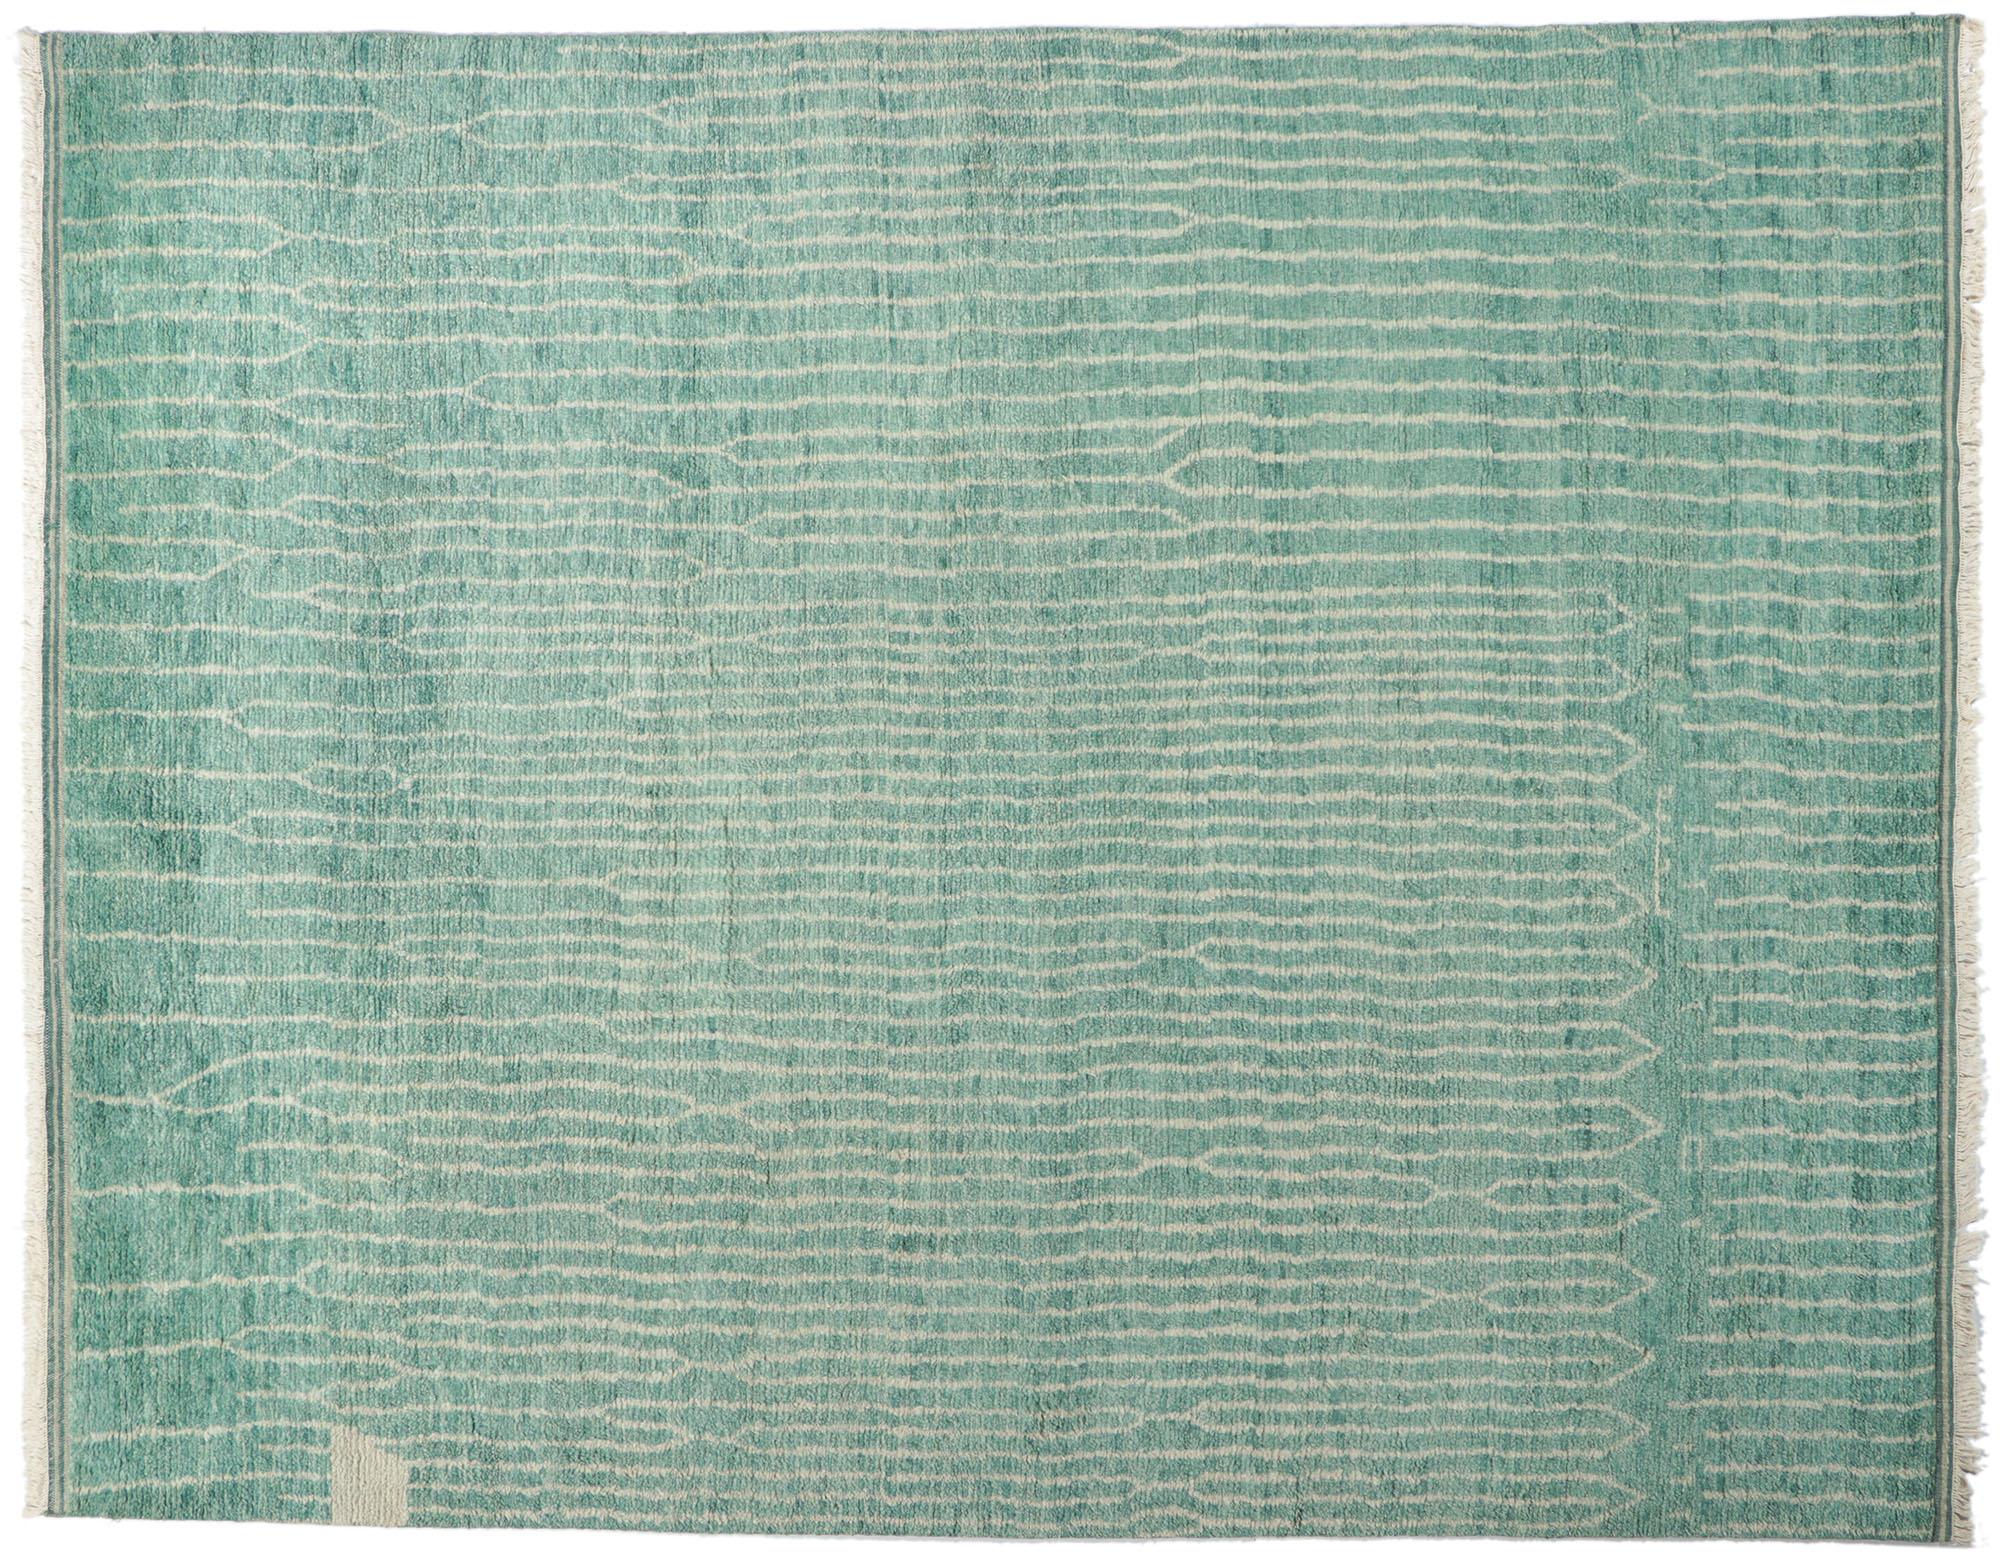 30774 New Contemporary Moroccan Style Rug 09'04 x 11'07. Channeling a coastal cottage with colors reminiscence of sea glass and weathered wood, this hand-knotted wool contemporary Moroccan style rug is a captivating vision of woven beauty. The